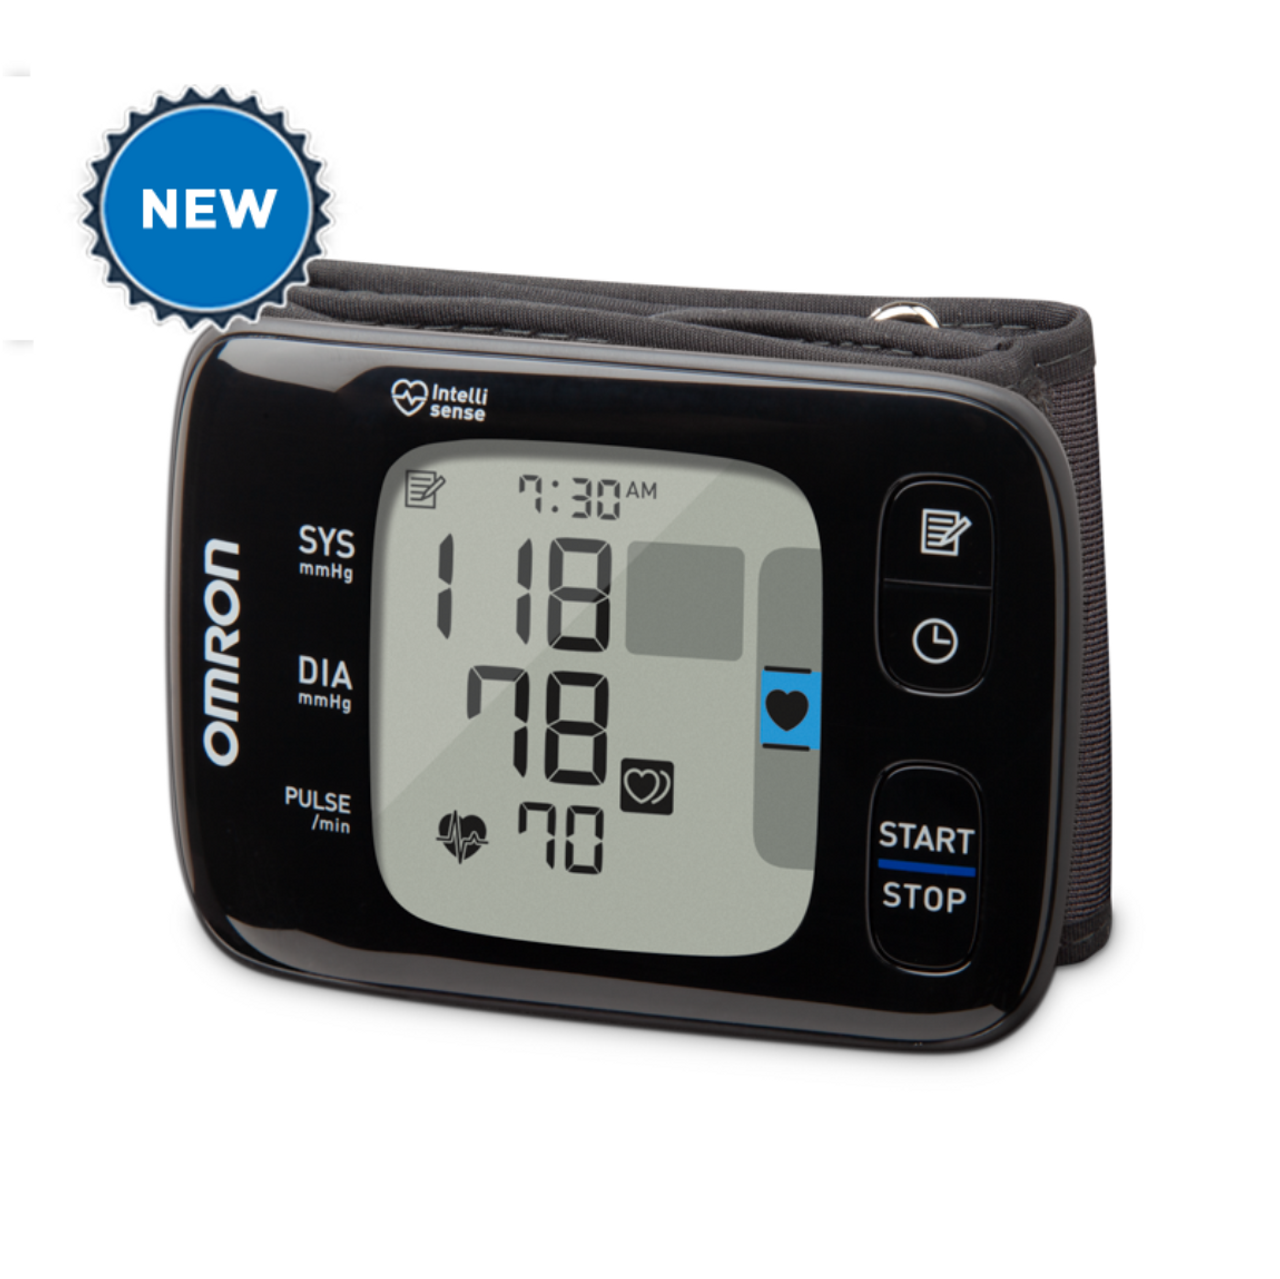 Pack of 12-Blood Pressure Monitor Bp7350 By Omron 7 Series By